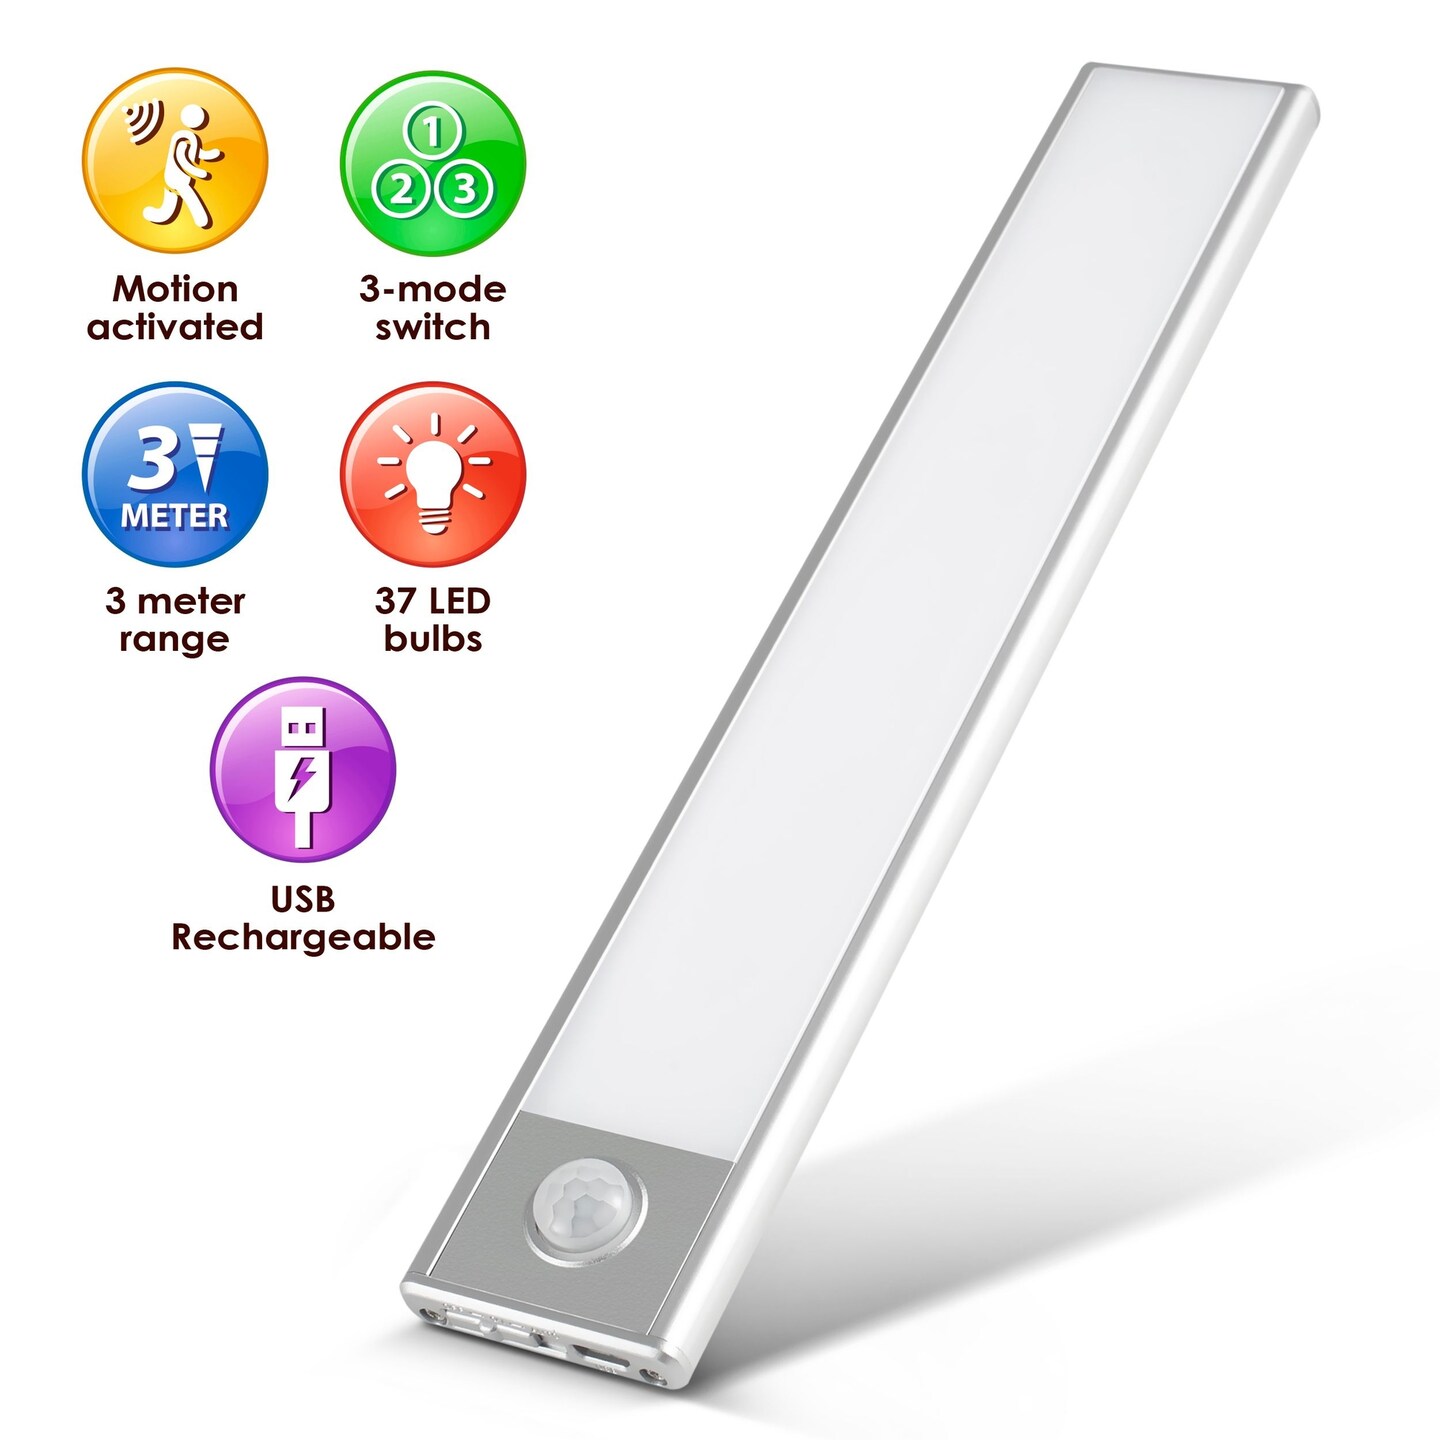 Super-Thin LED Lamp buy now